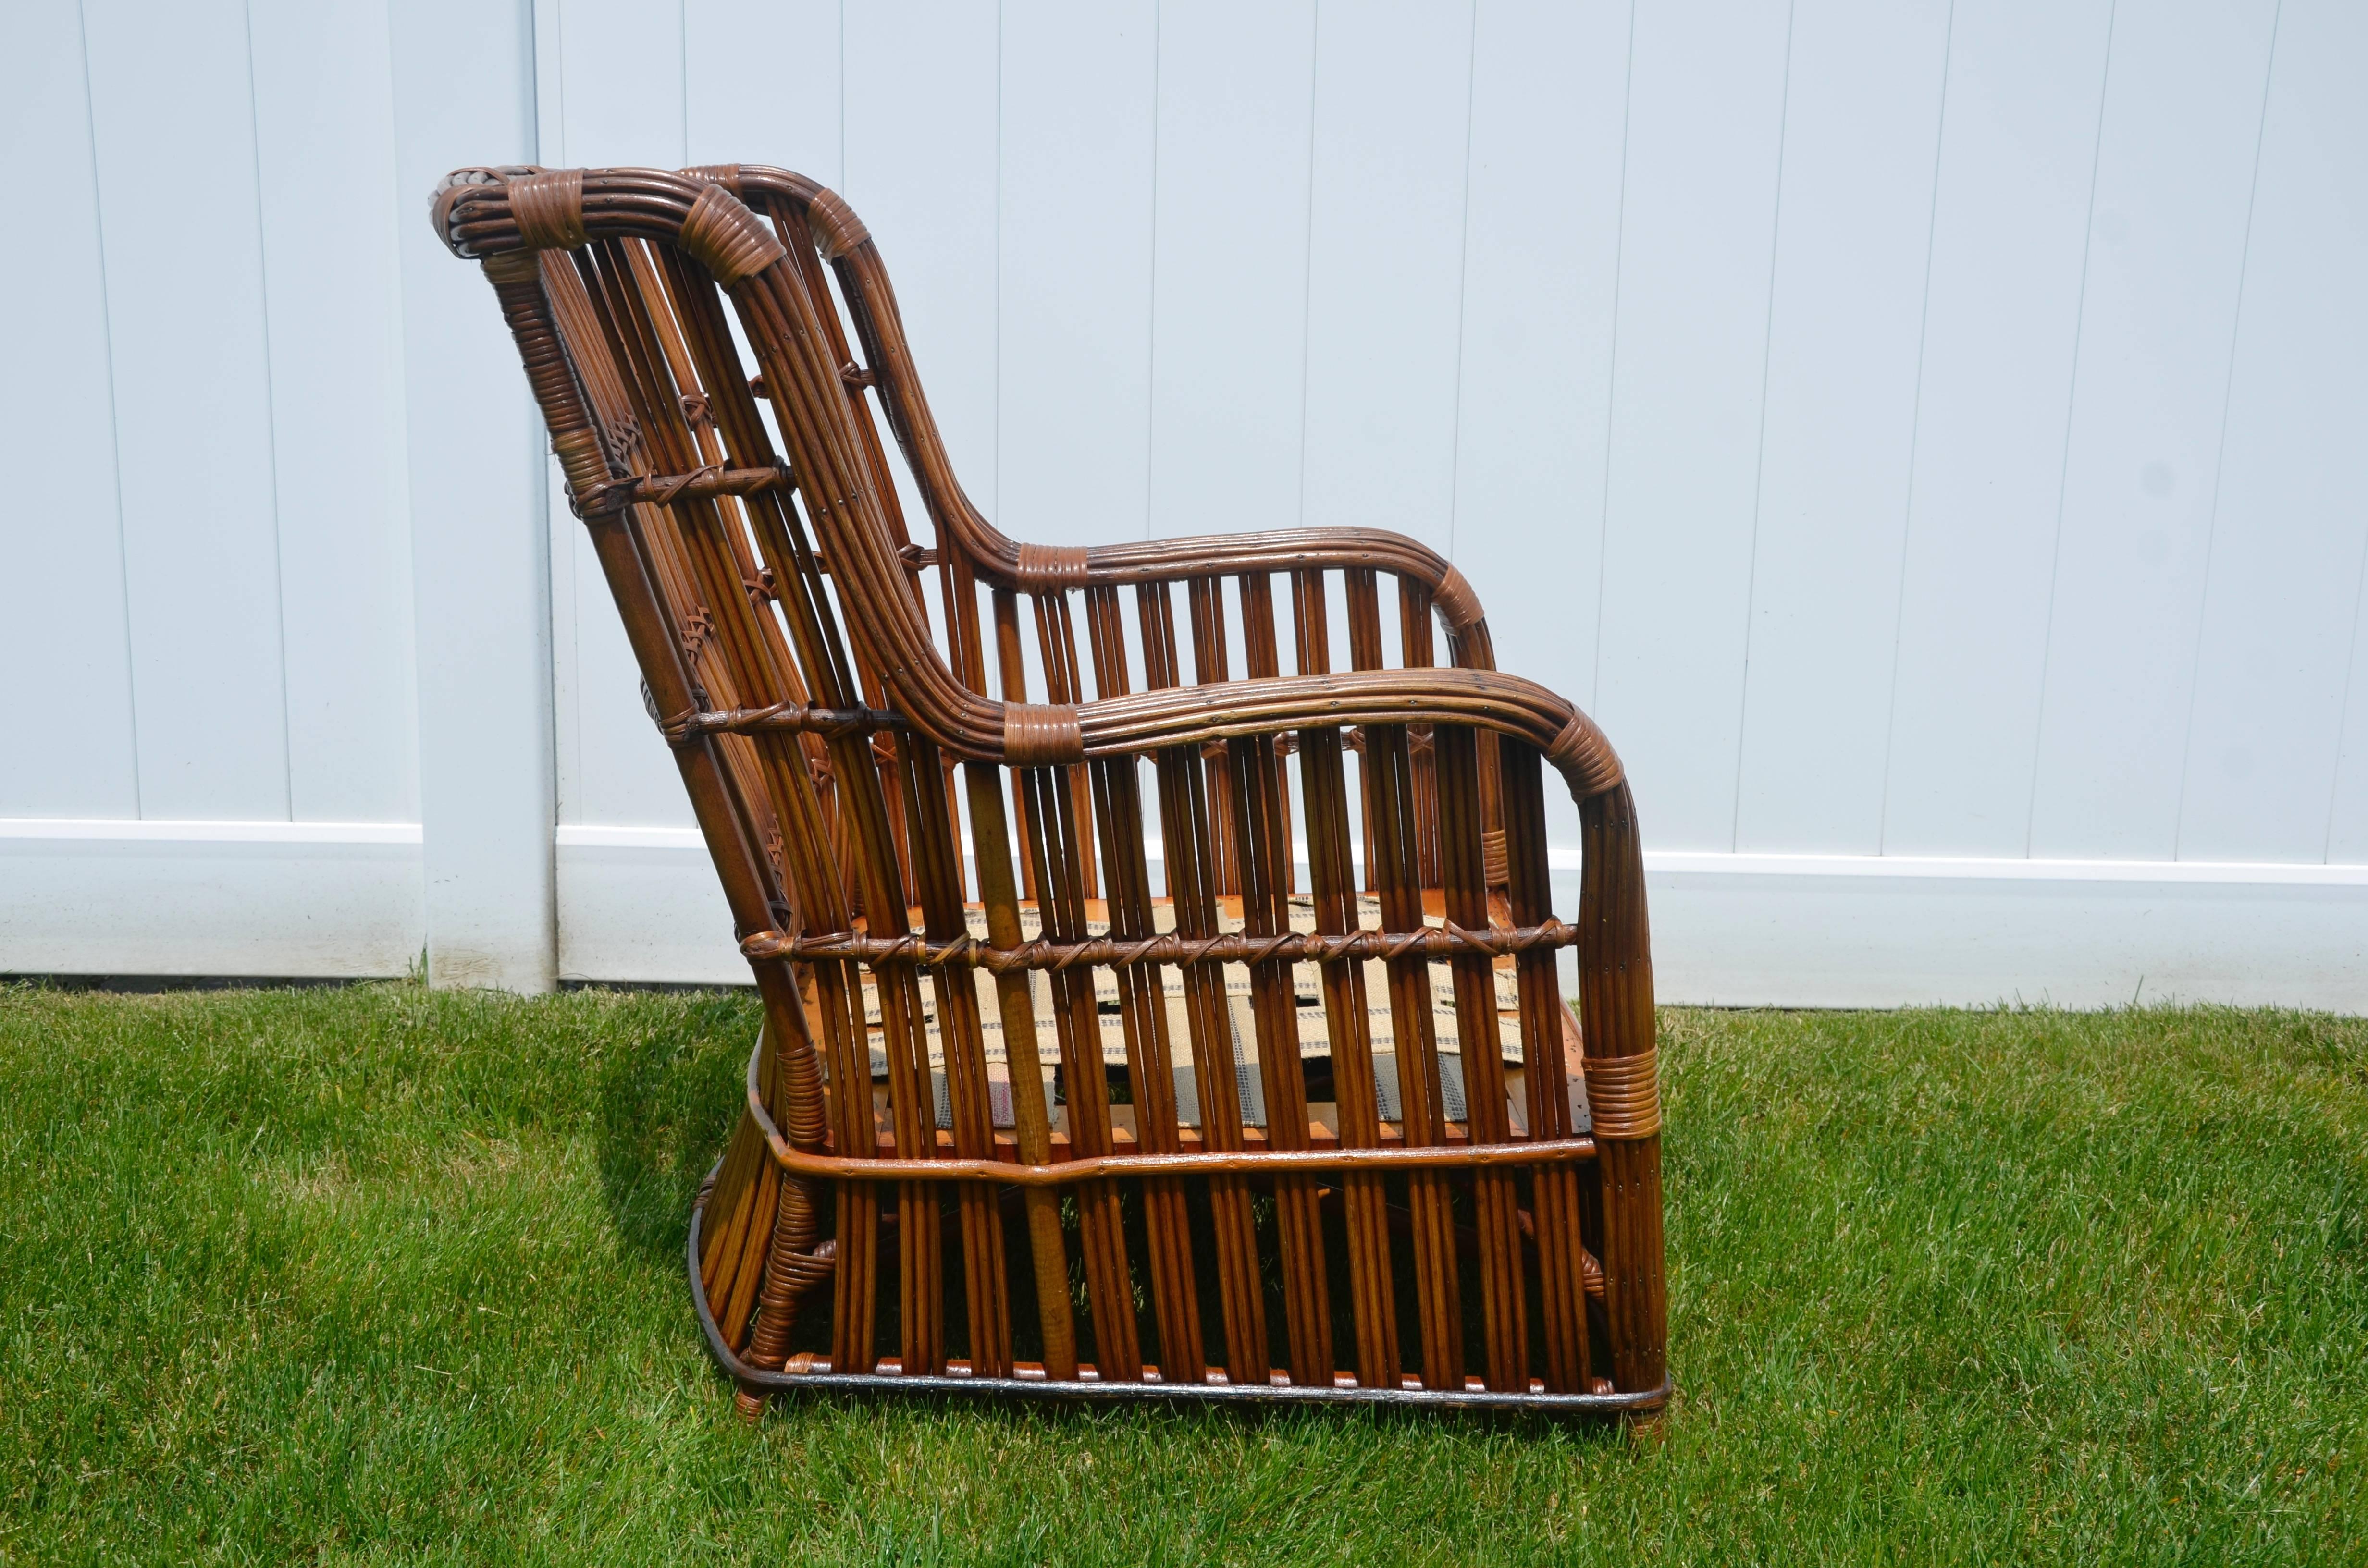 A beautiful stick rattan armchair in natural finish. This chair has a substantial hardwood frame with inset springs covered in fresh webbing. The pattern uses three rods of rattan instead of the usual two seen in most stick wicker giving the piece a